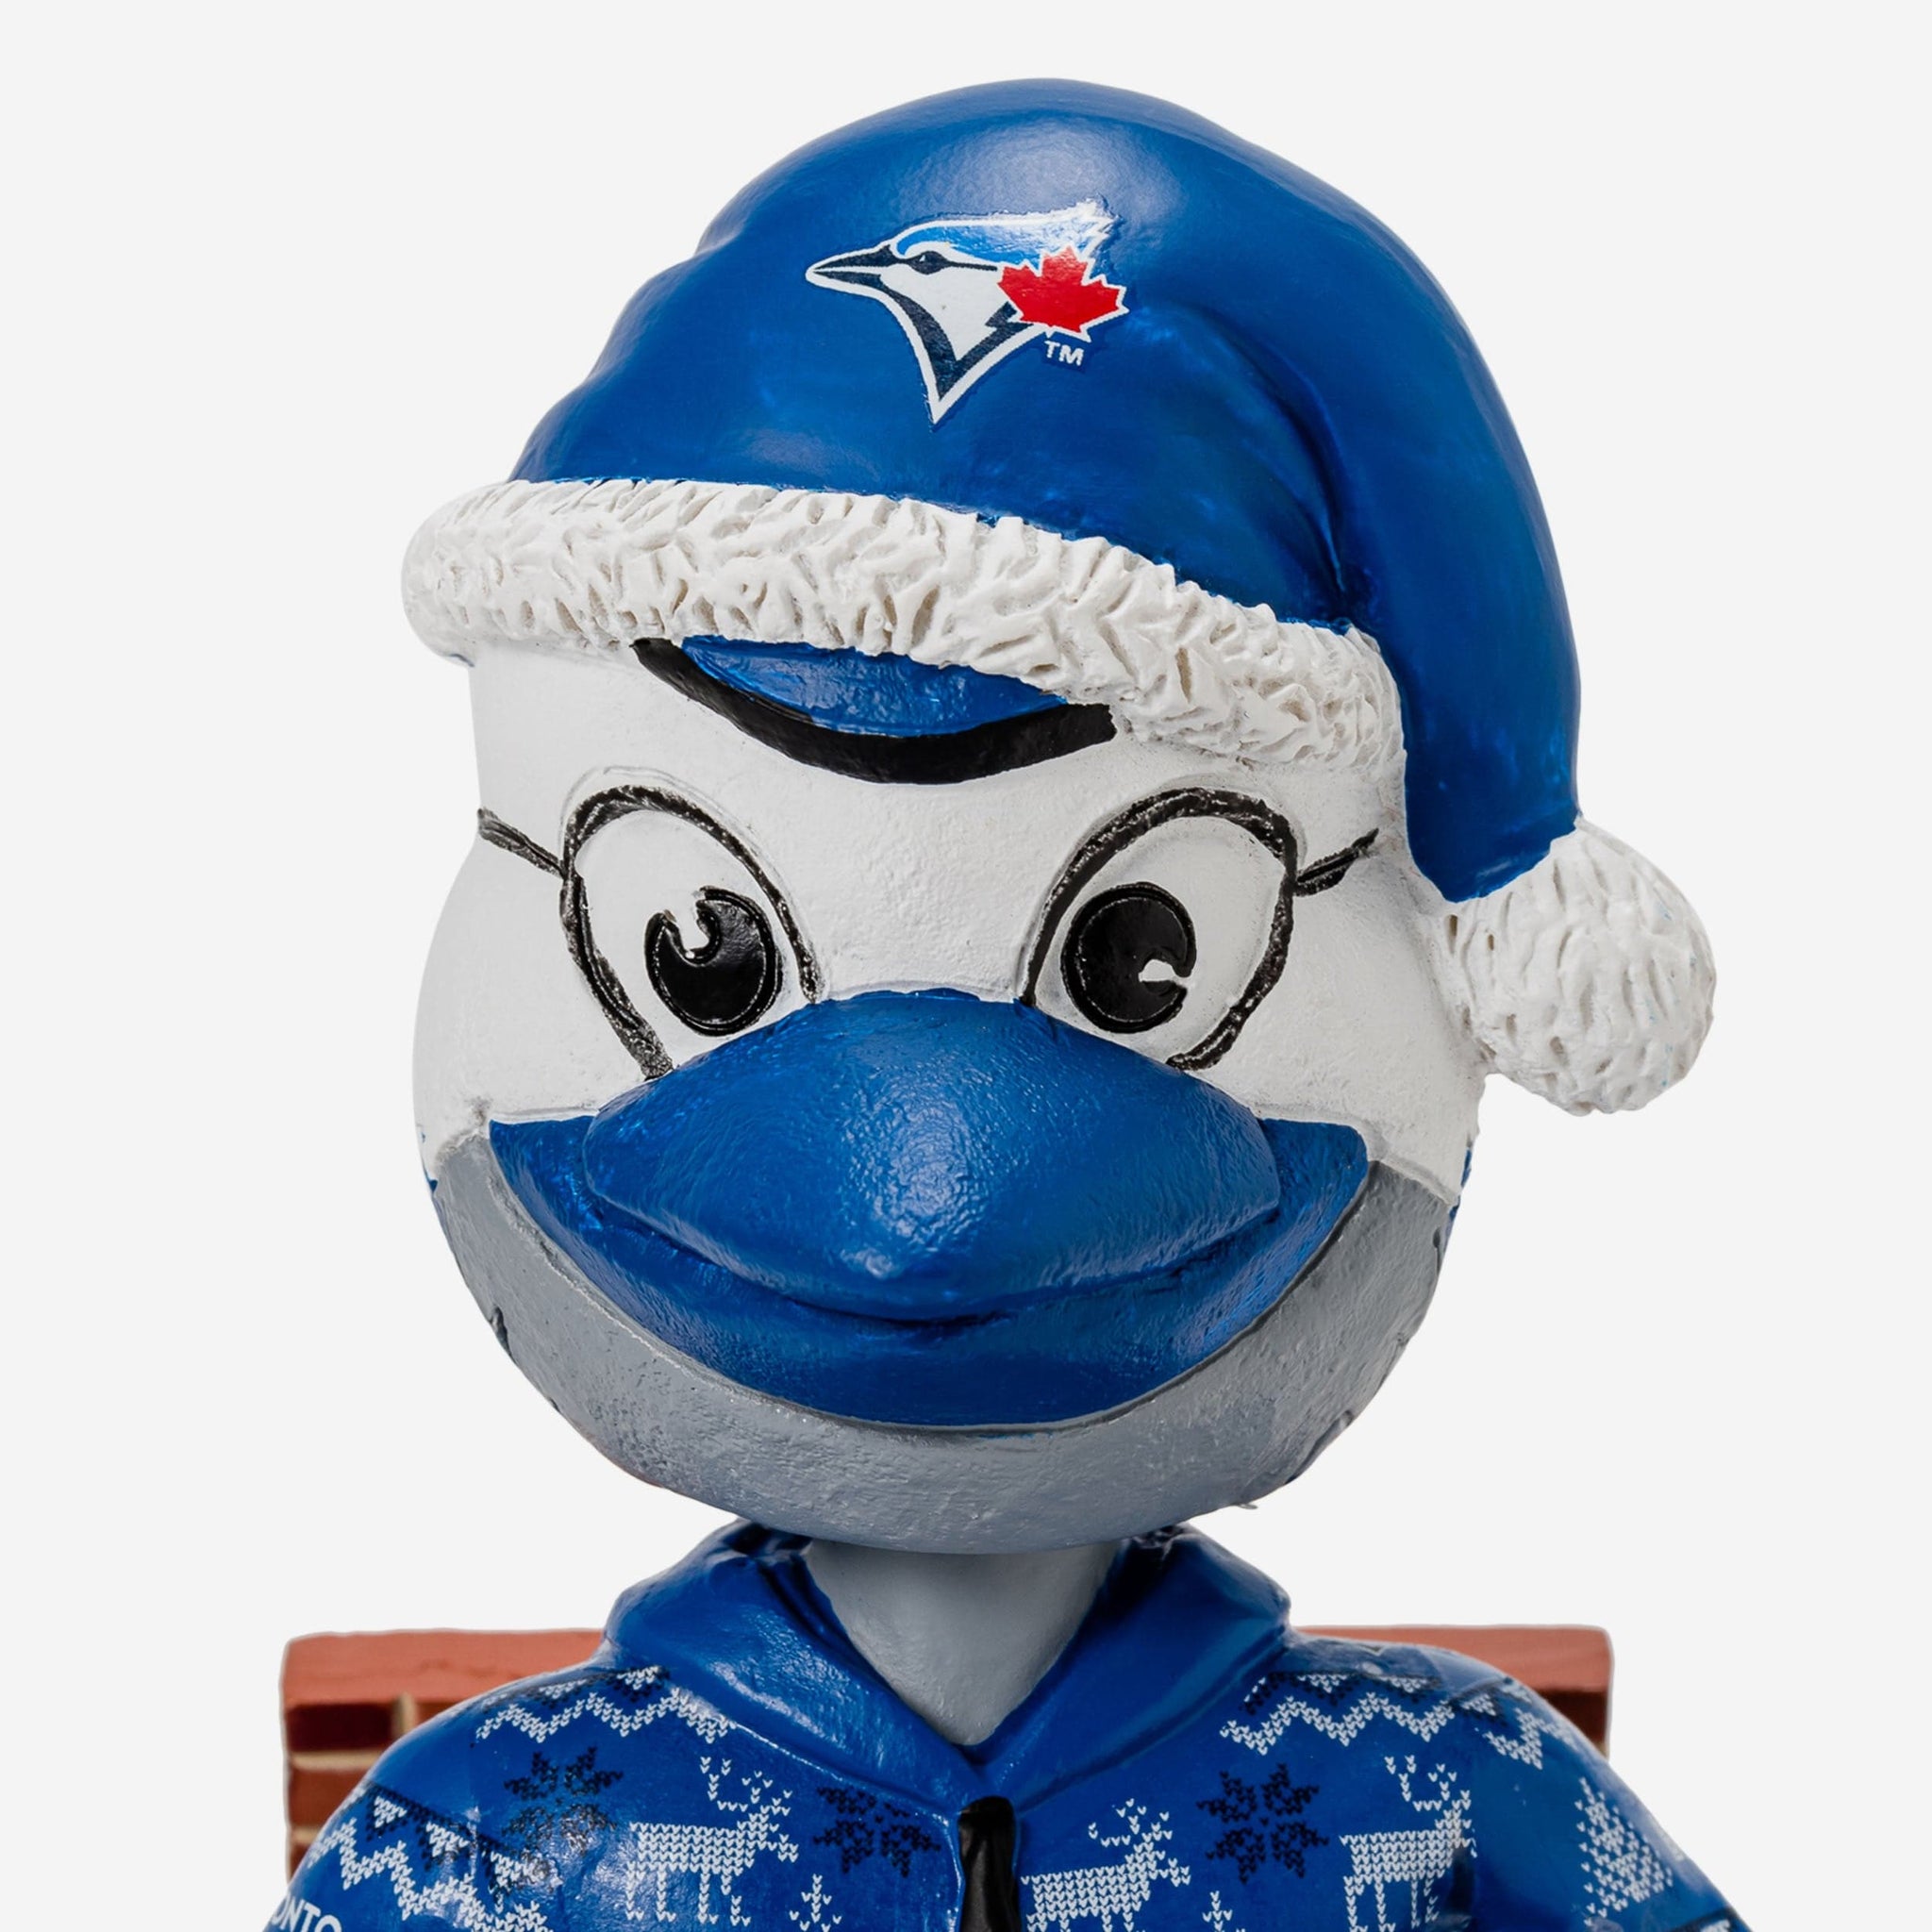 Ace Toronto Blue Jays Holiday Mascot Bobblehead Officially Licensed by MLB